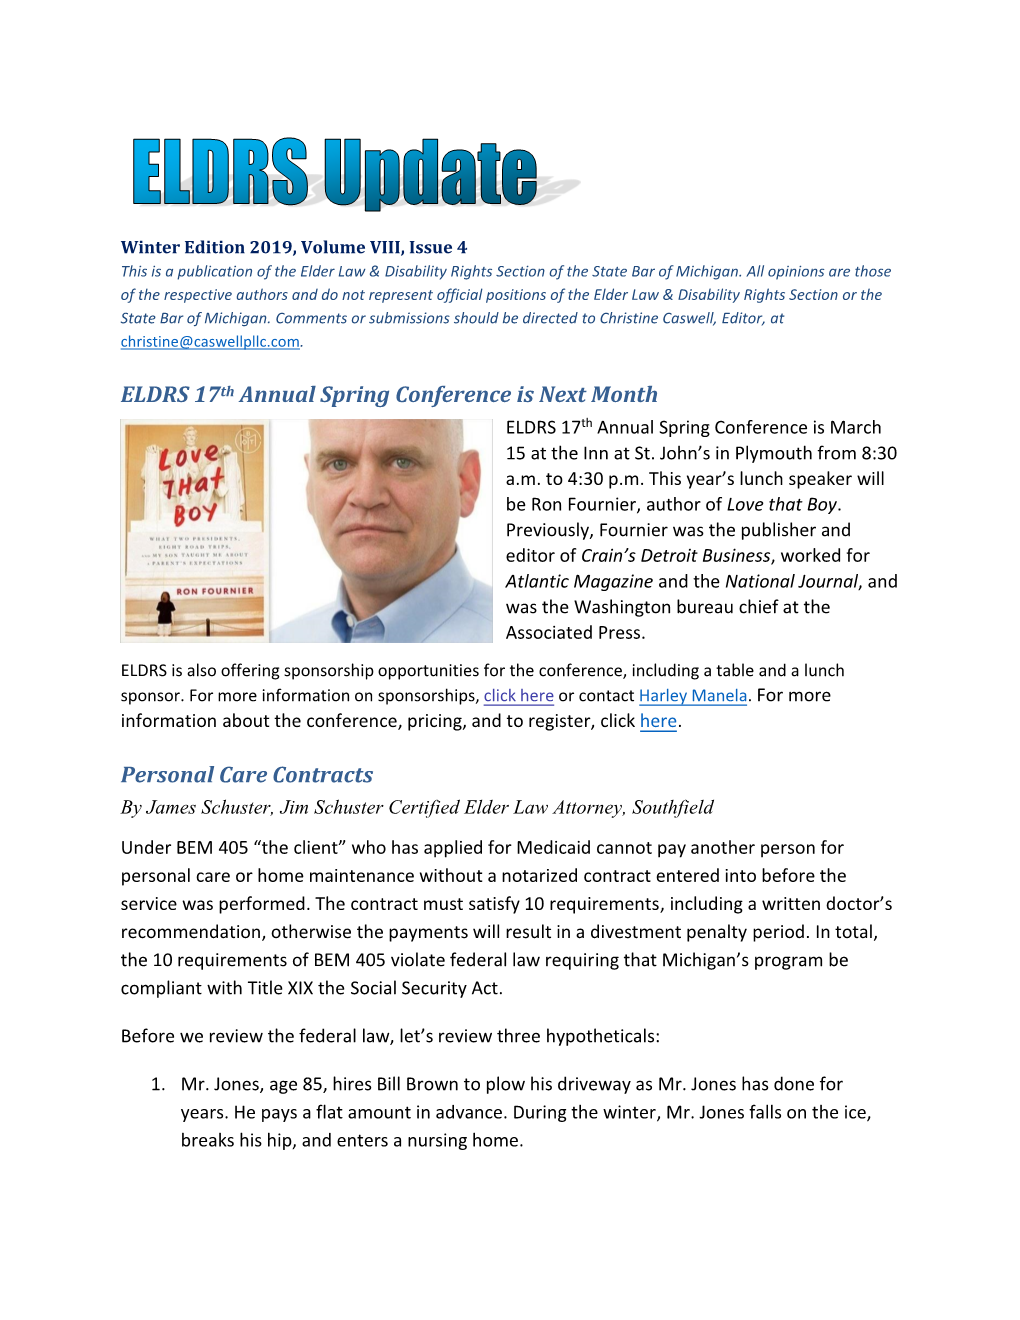 Elder Law & Disability Rights Section Winter 2019 Update